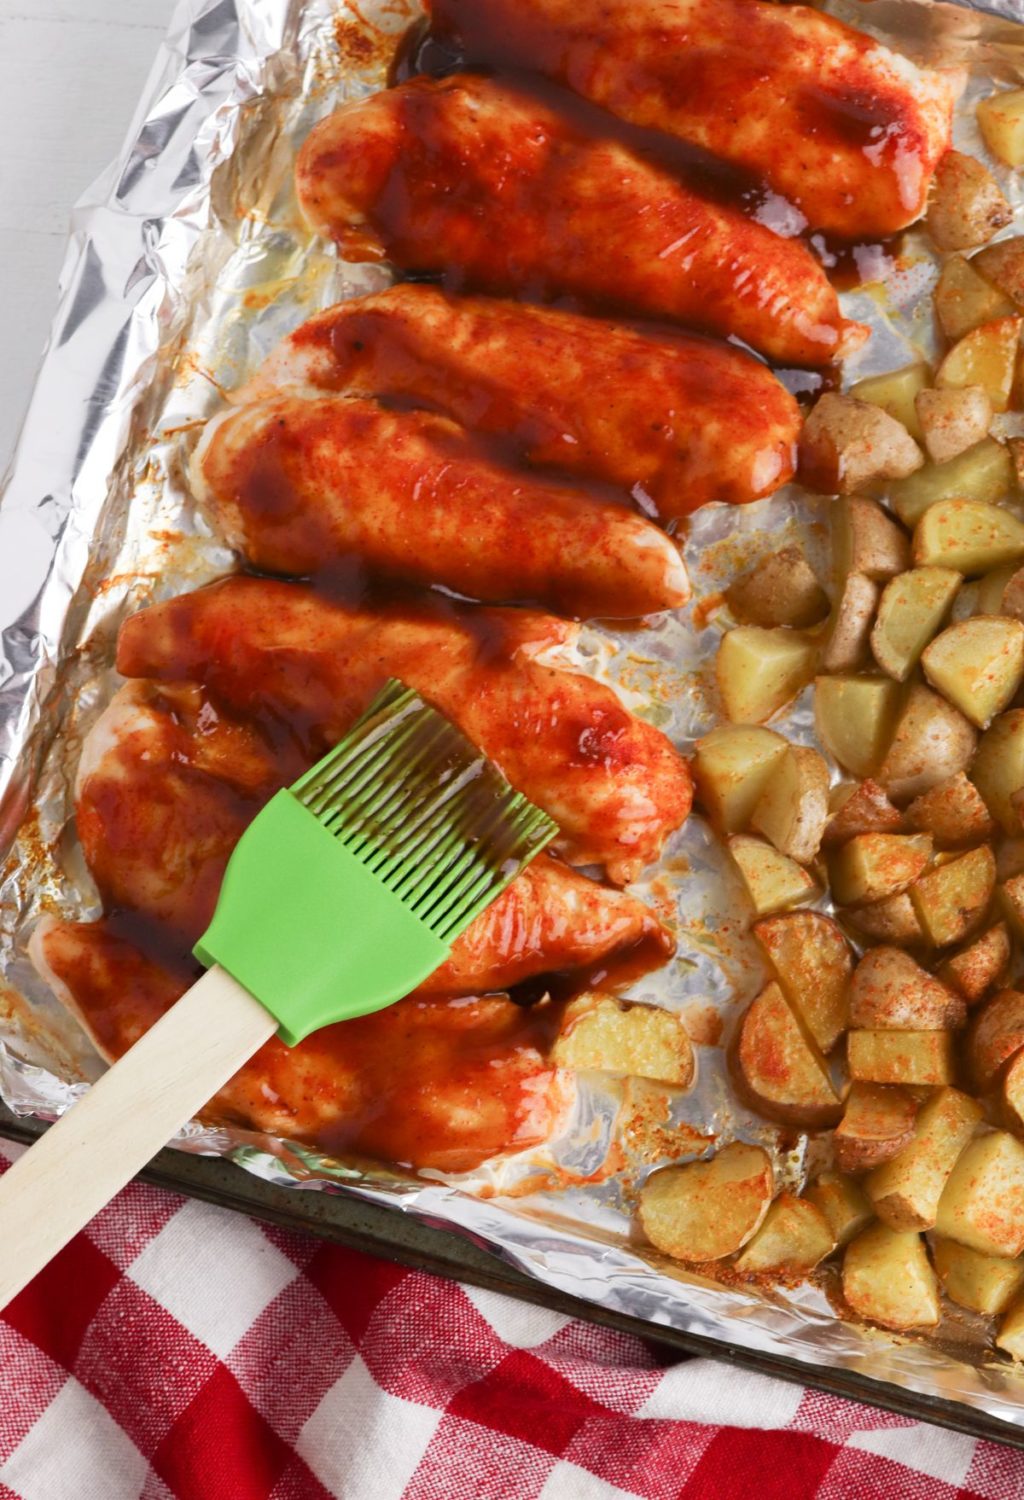 Bbq chicken and potatoes on a baking sheet.